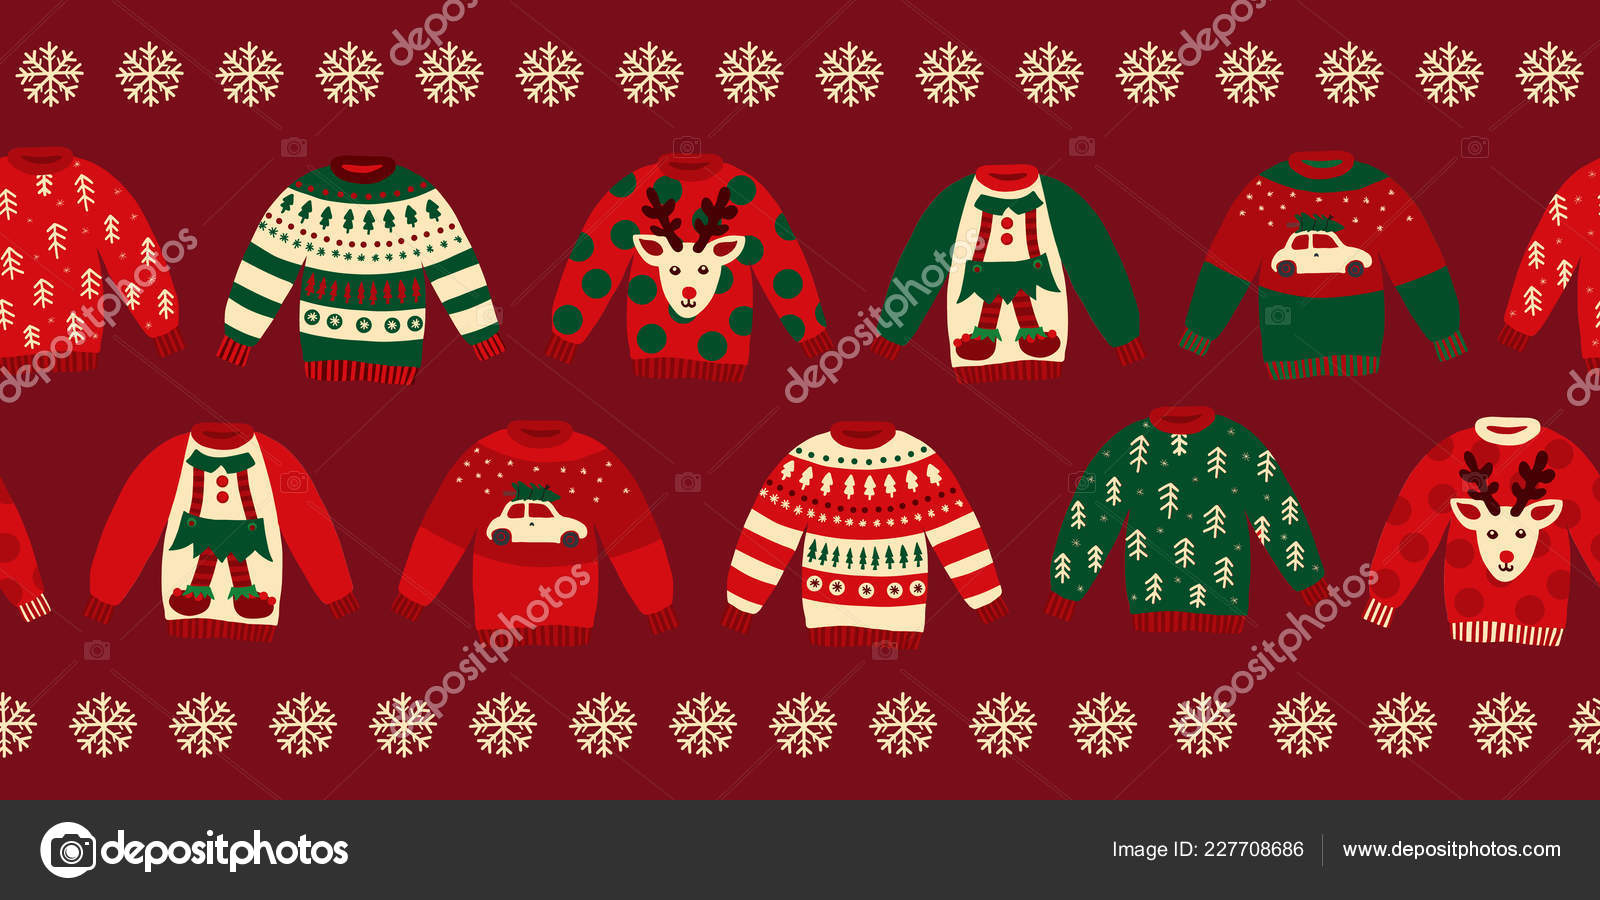 Ugly Christmas Sweater Cover - HD Wallpaper 